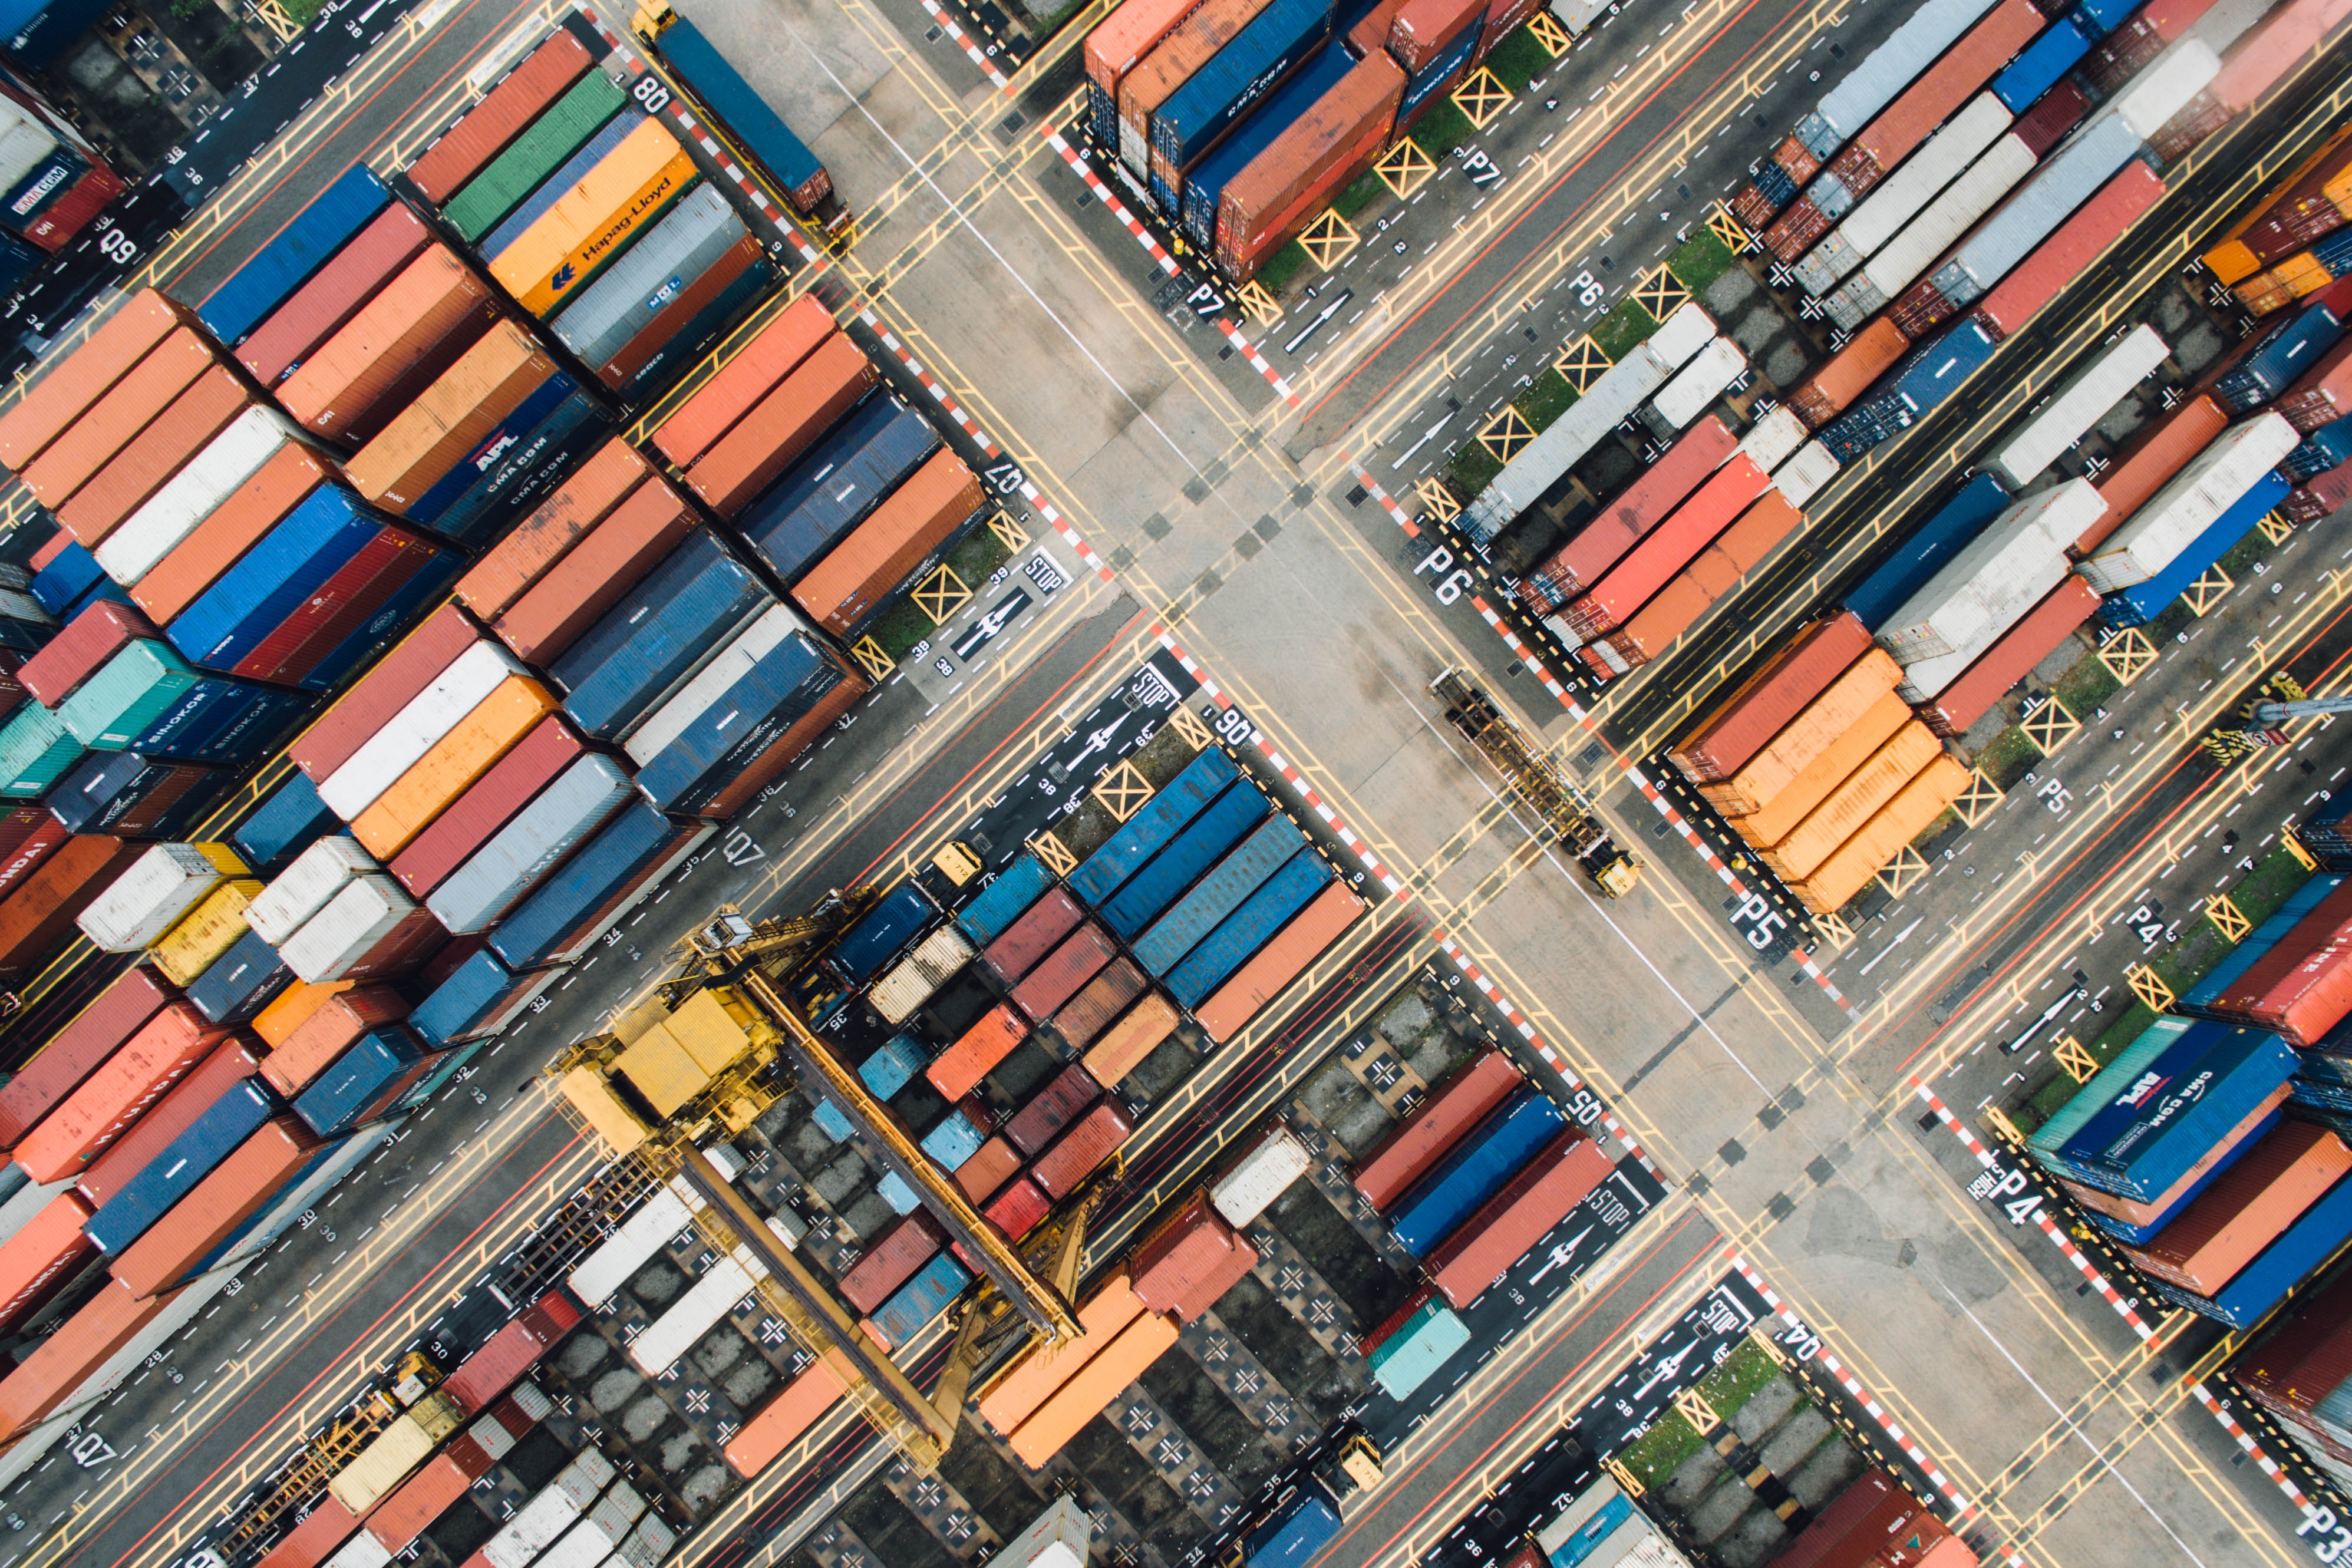 A shipping yard from above,
with rows of colorful stacked shipping containers
